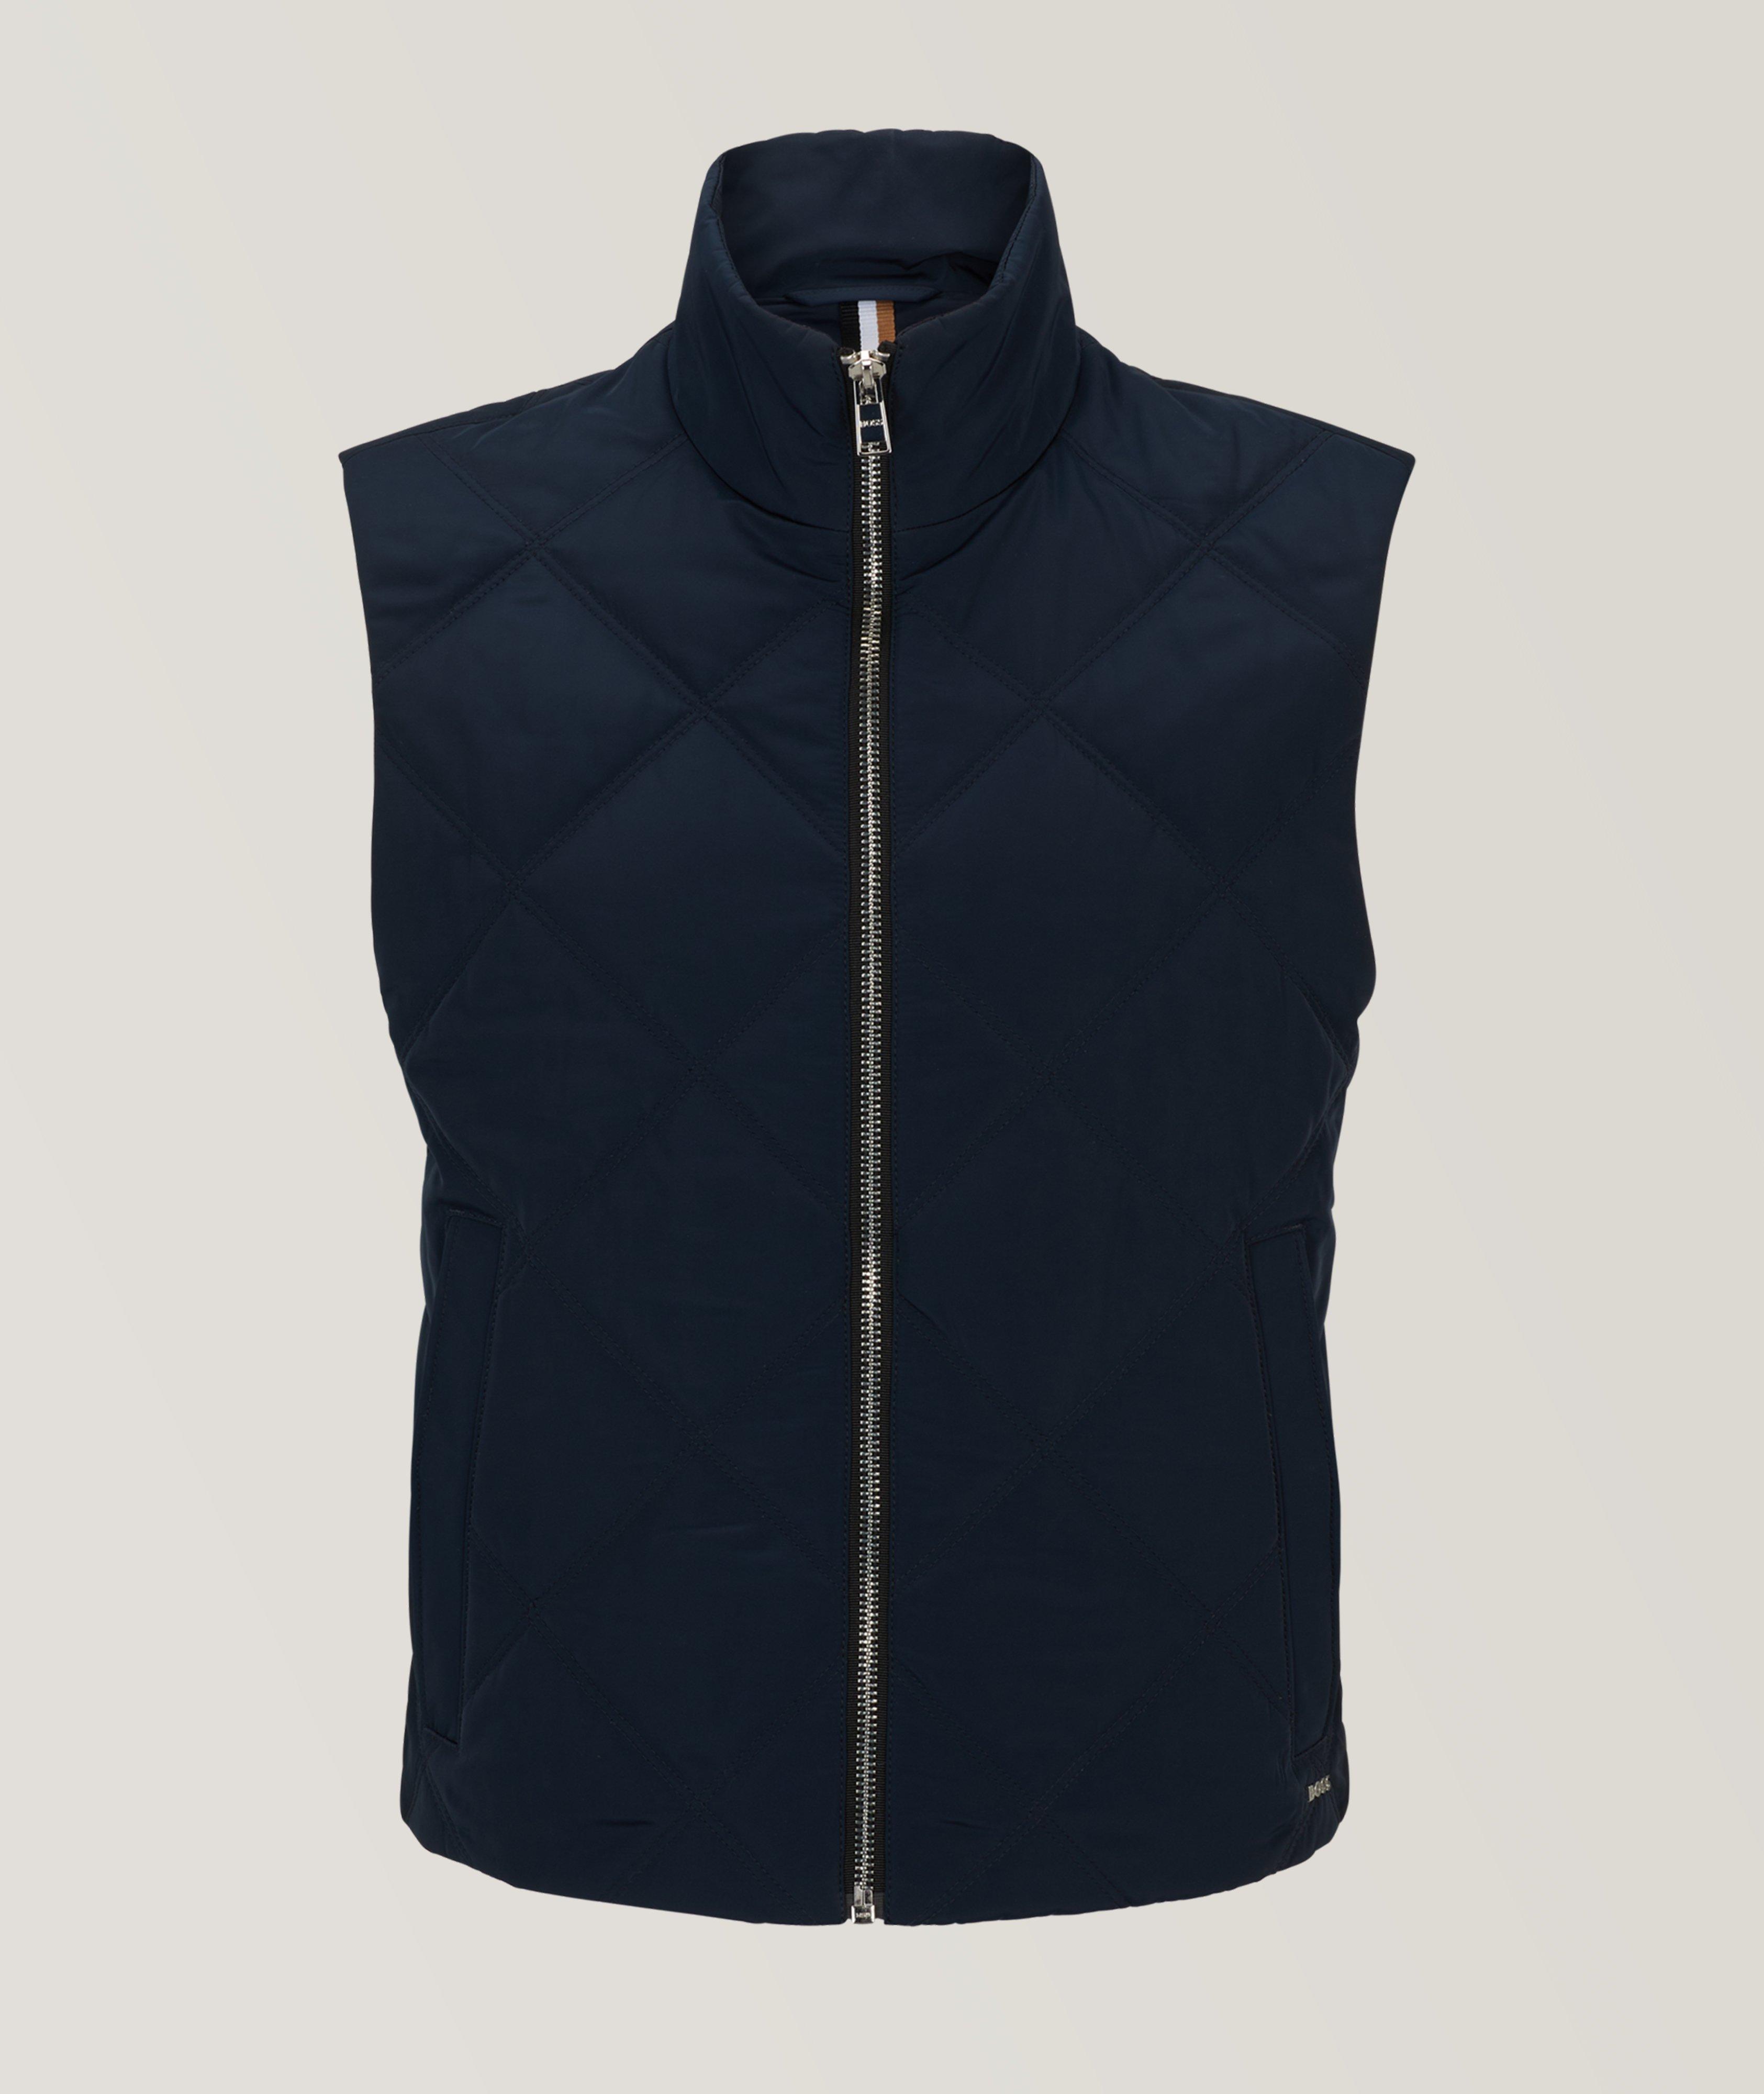 Quilted Technical Fabric Vest image 0